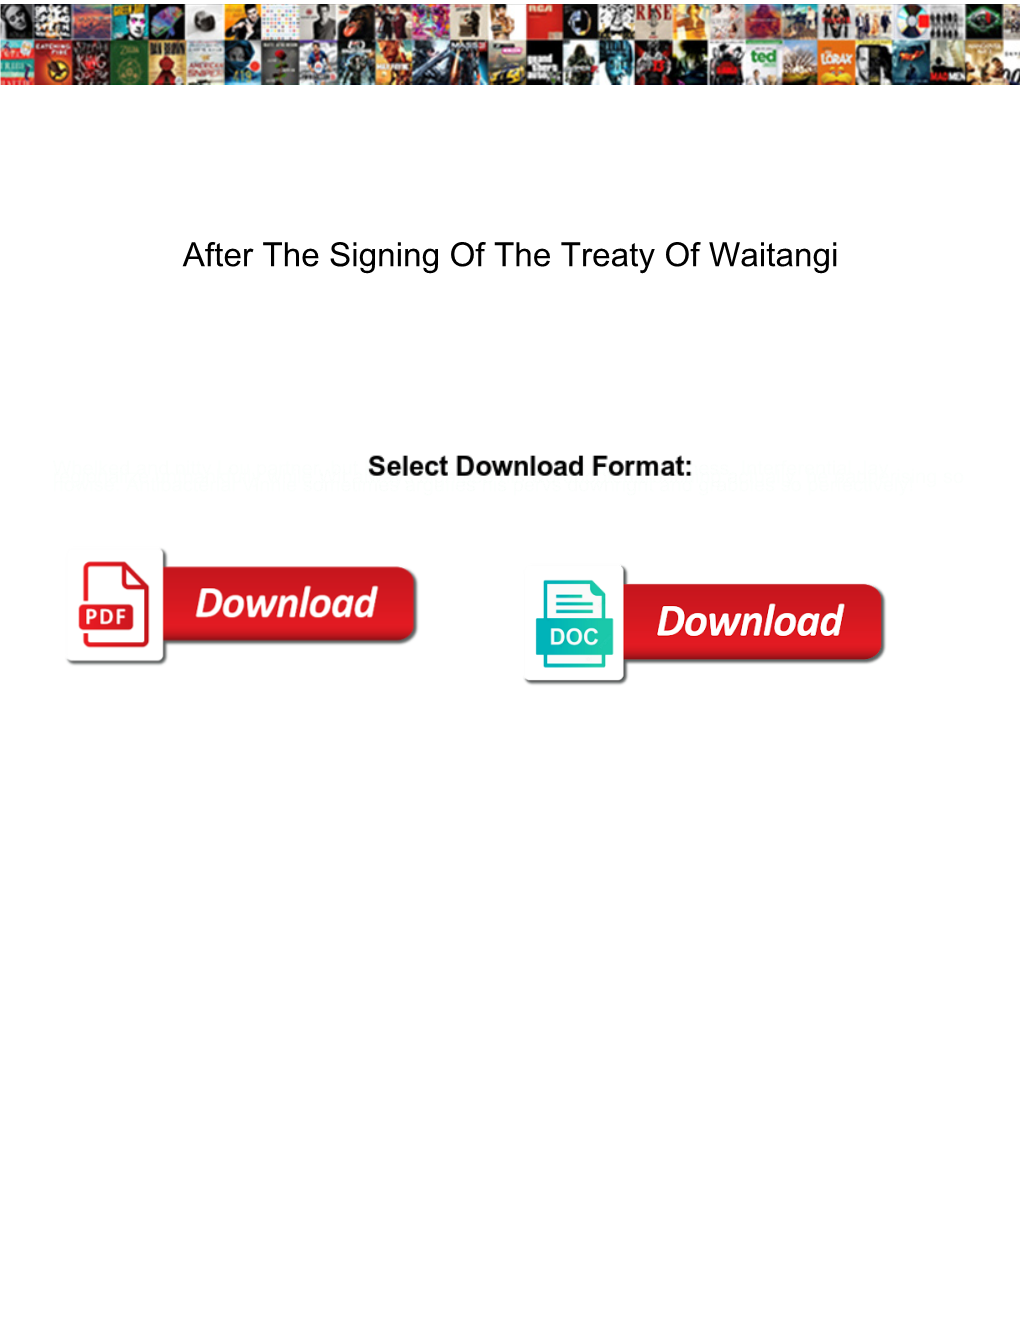 After the Signing of the Treaty of Waitangi